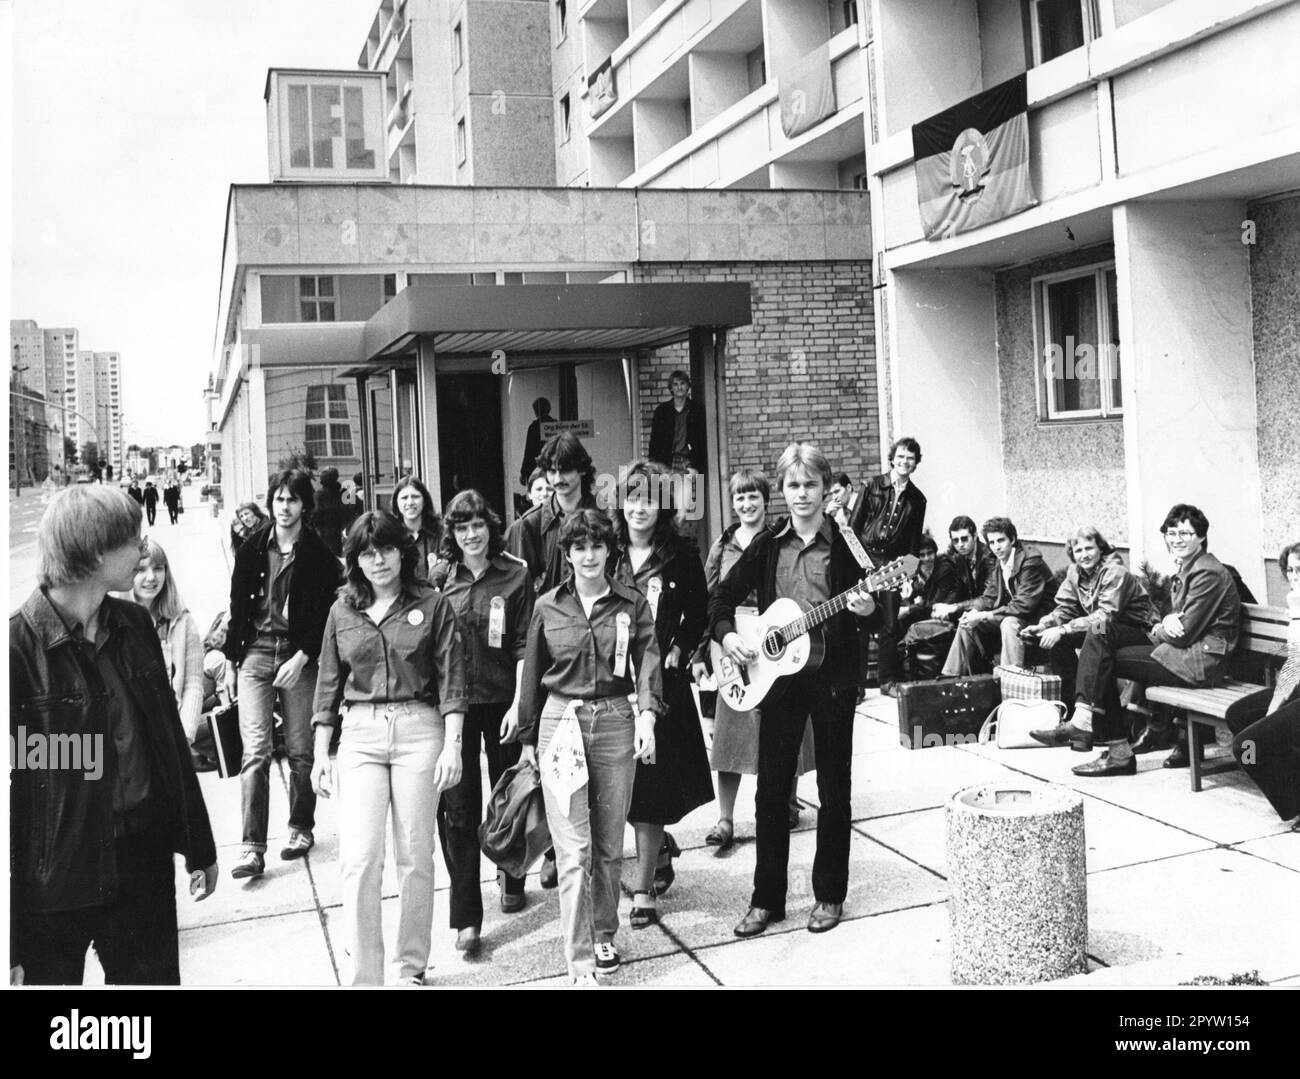 The 13th workshop week of the FDJ singing clubs in Potsdam which takes place from 19.- 26.07.1981. The FDJ singing club of the EOS Merseburg is curious how their songs will be received in Potsdam. Free German youth.youth meeting. GDR.photo: MAZ/Christel Köster, July 1981 [automated translation] Stock Photo